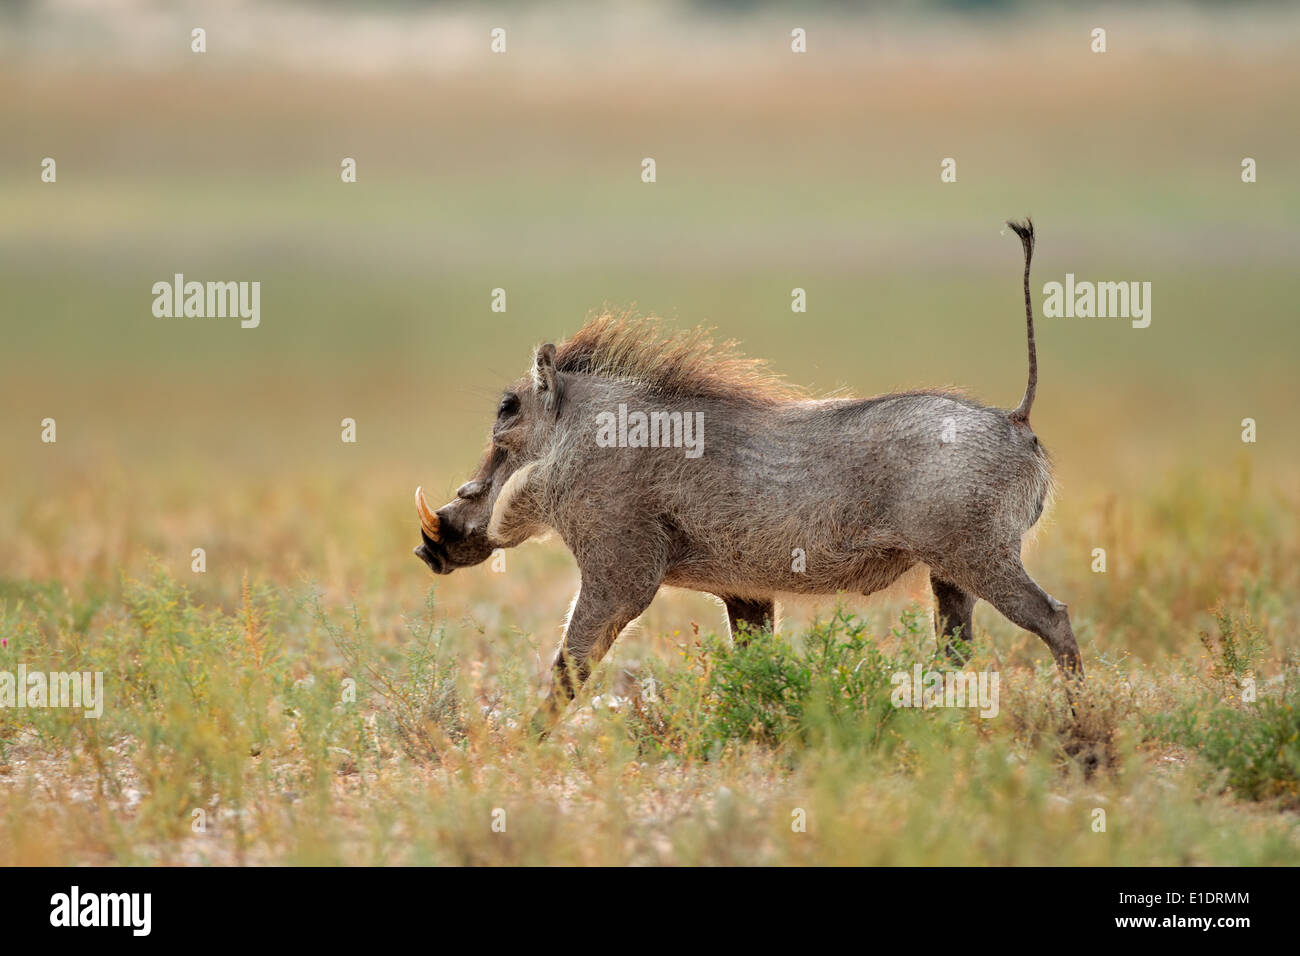 Warthog (Phacochoerus africanus) running with upright tail, South Africa Stock Photo